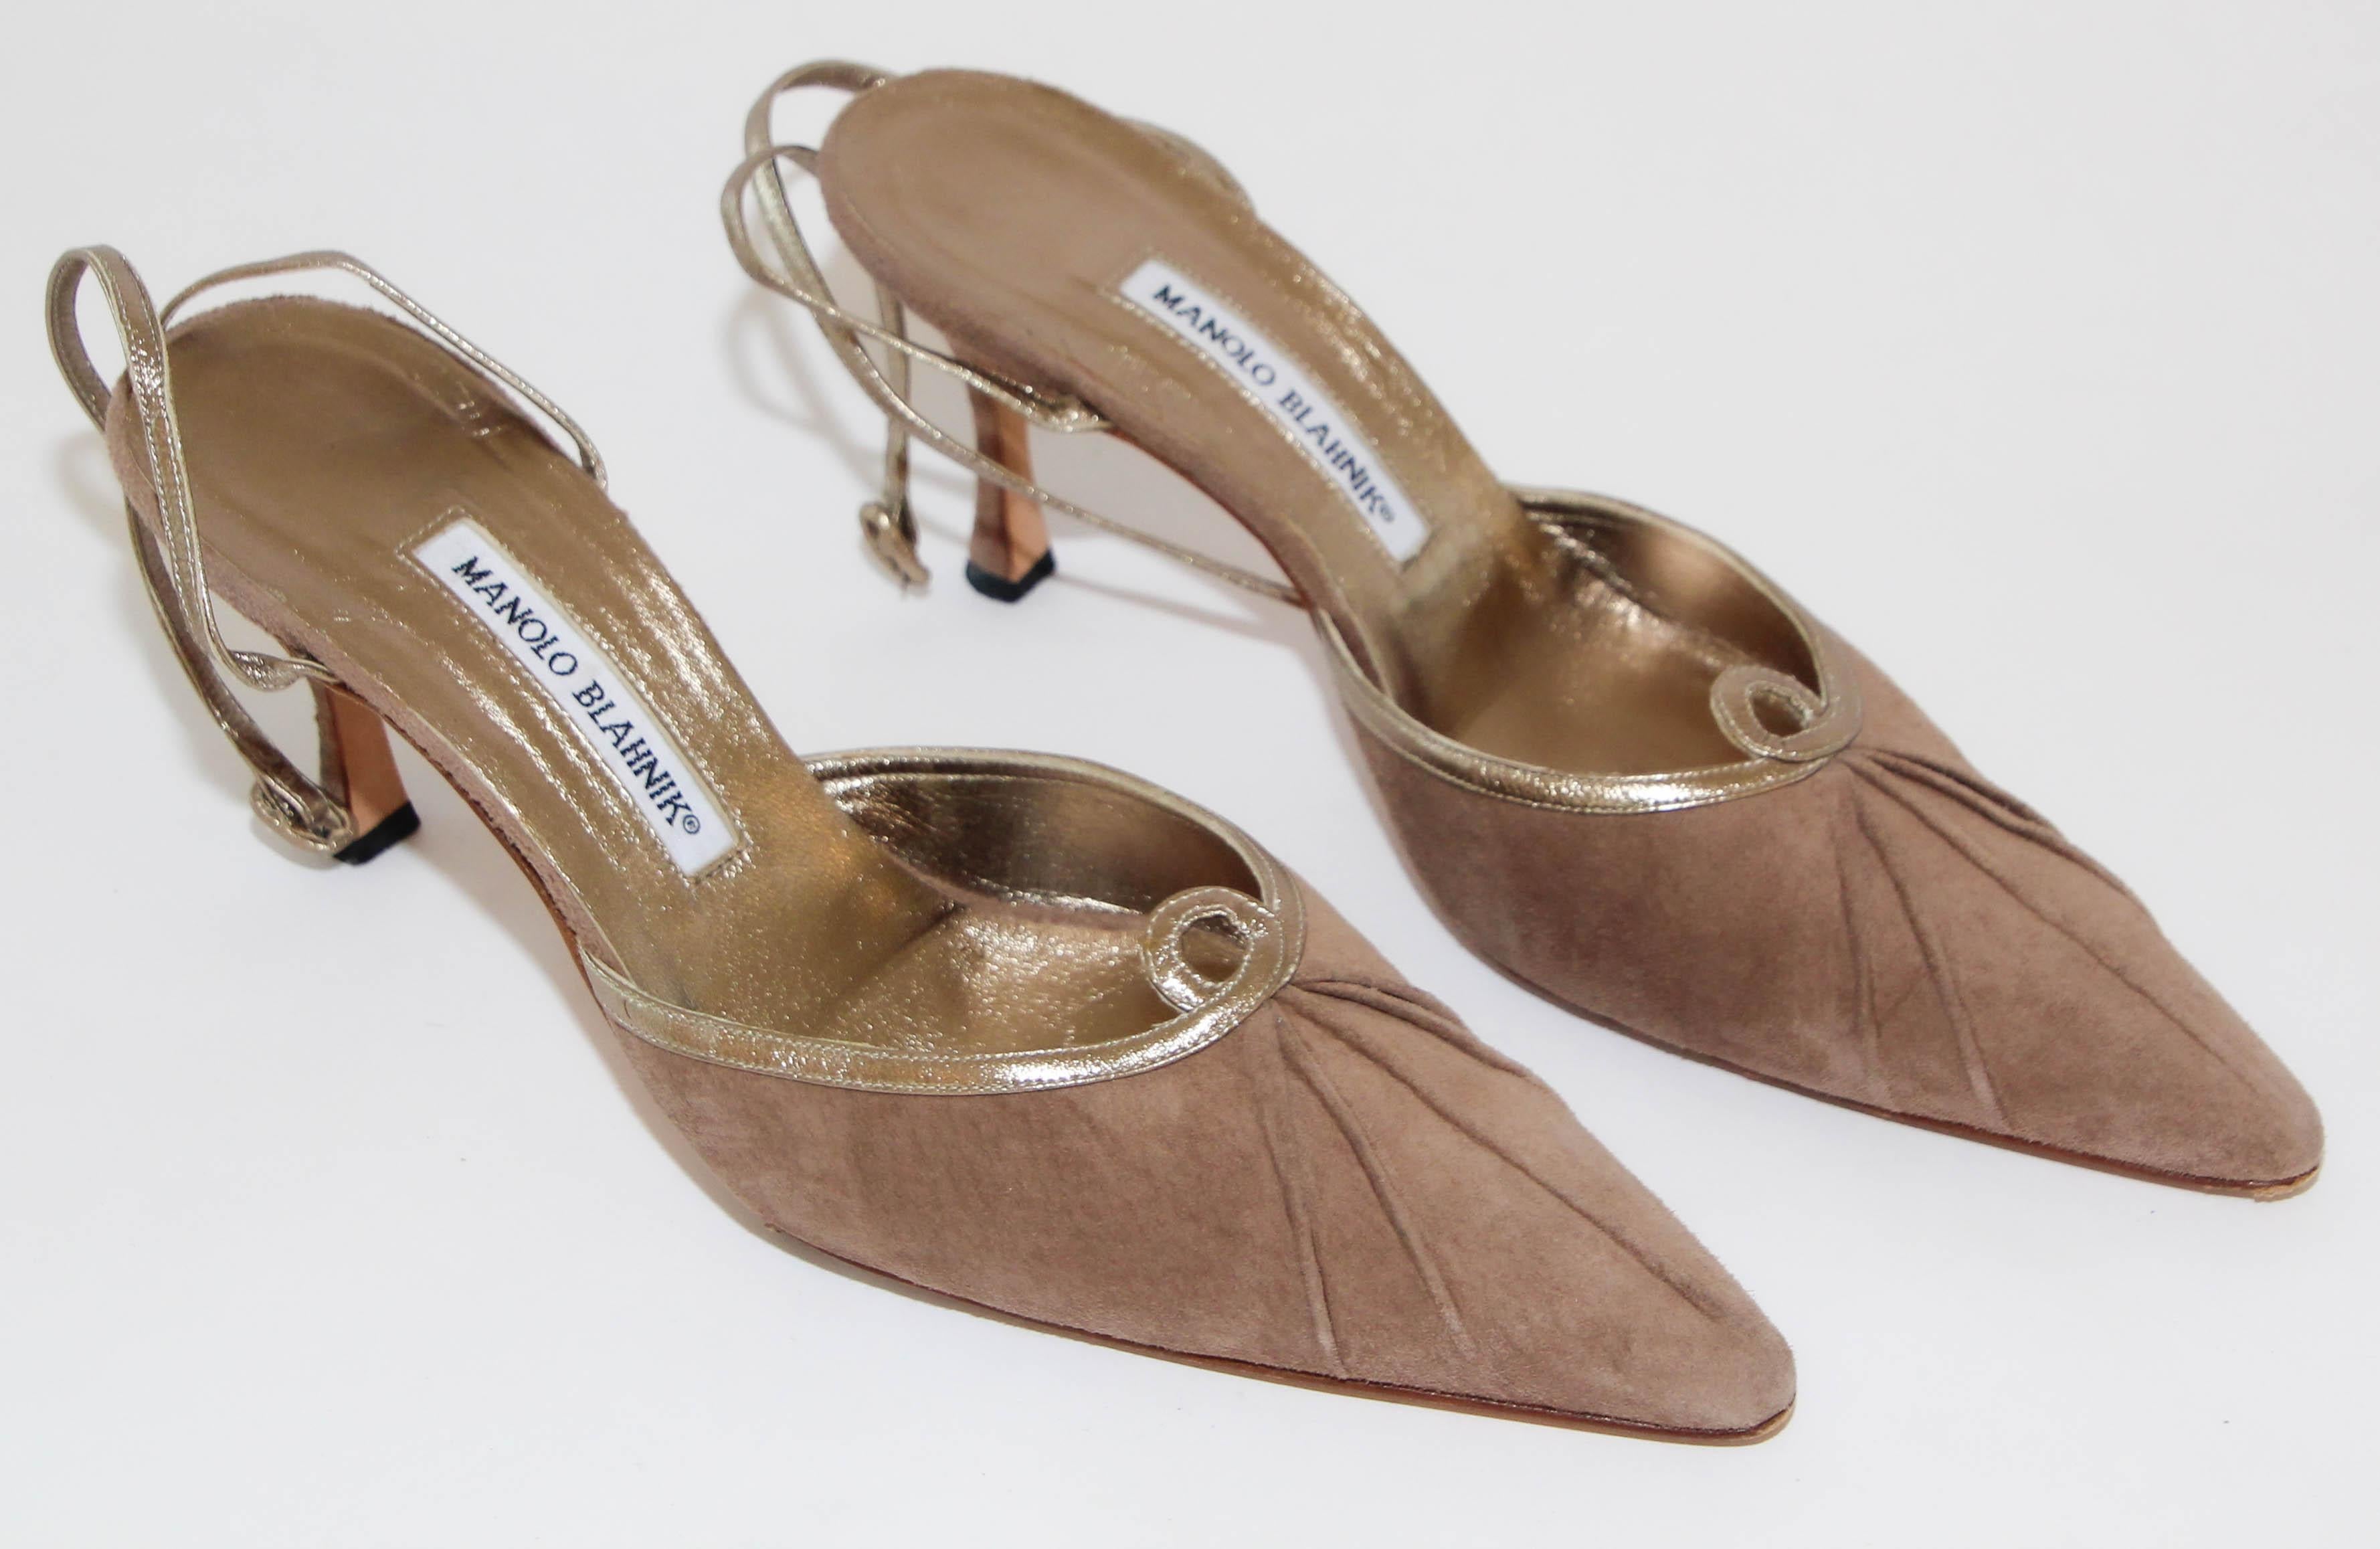 Manolo Blahnik Vintage Suede Shoes With Leather Ankle Straps Size 40 For Sale 10